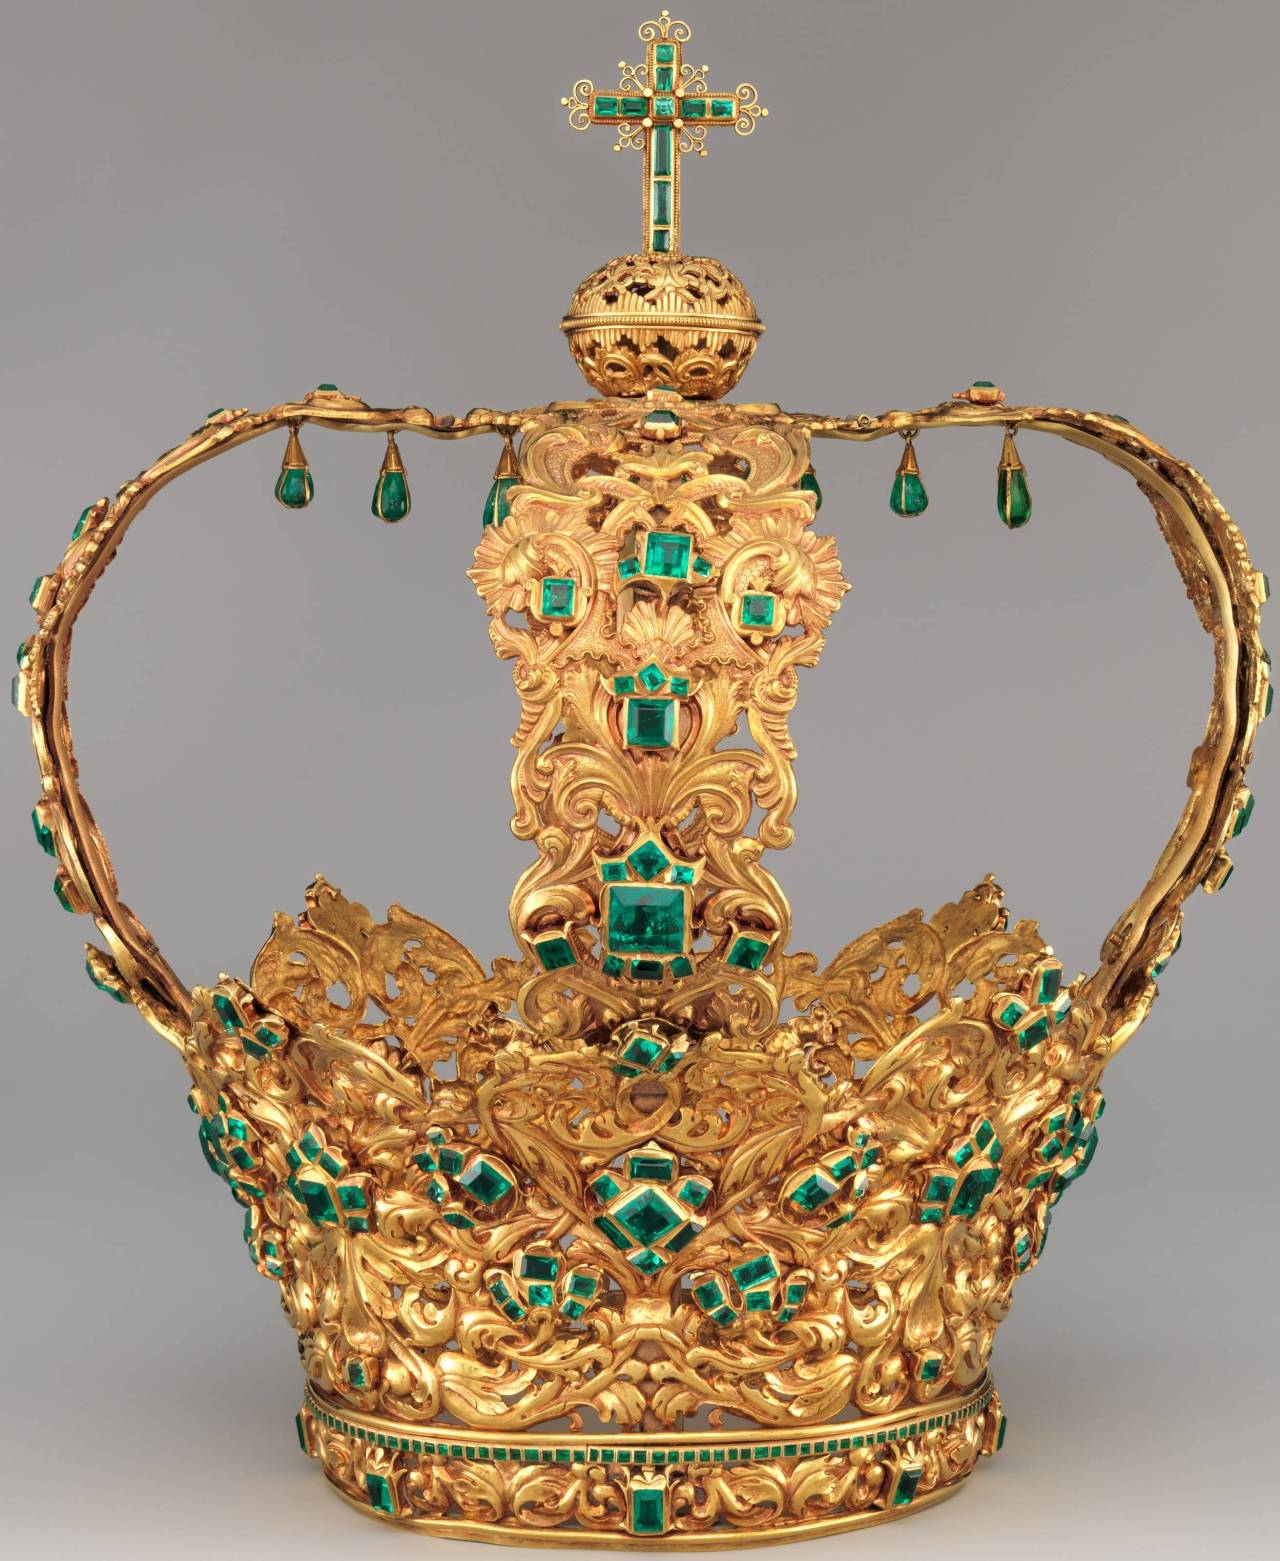 museum-of-artifacts:    The Crown of the Andes, a rare surviving example of 17th